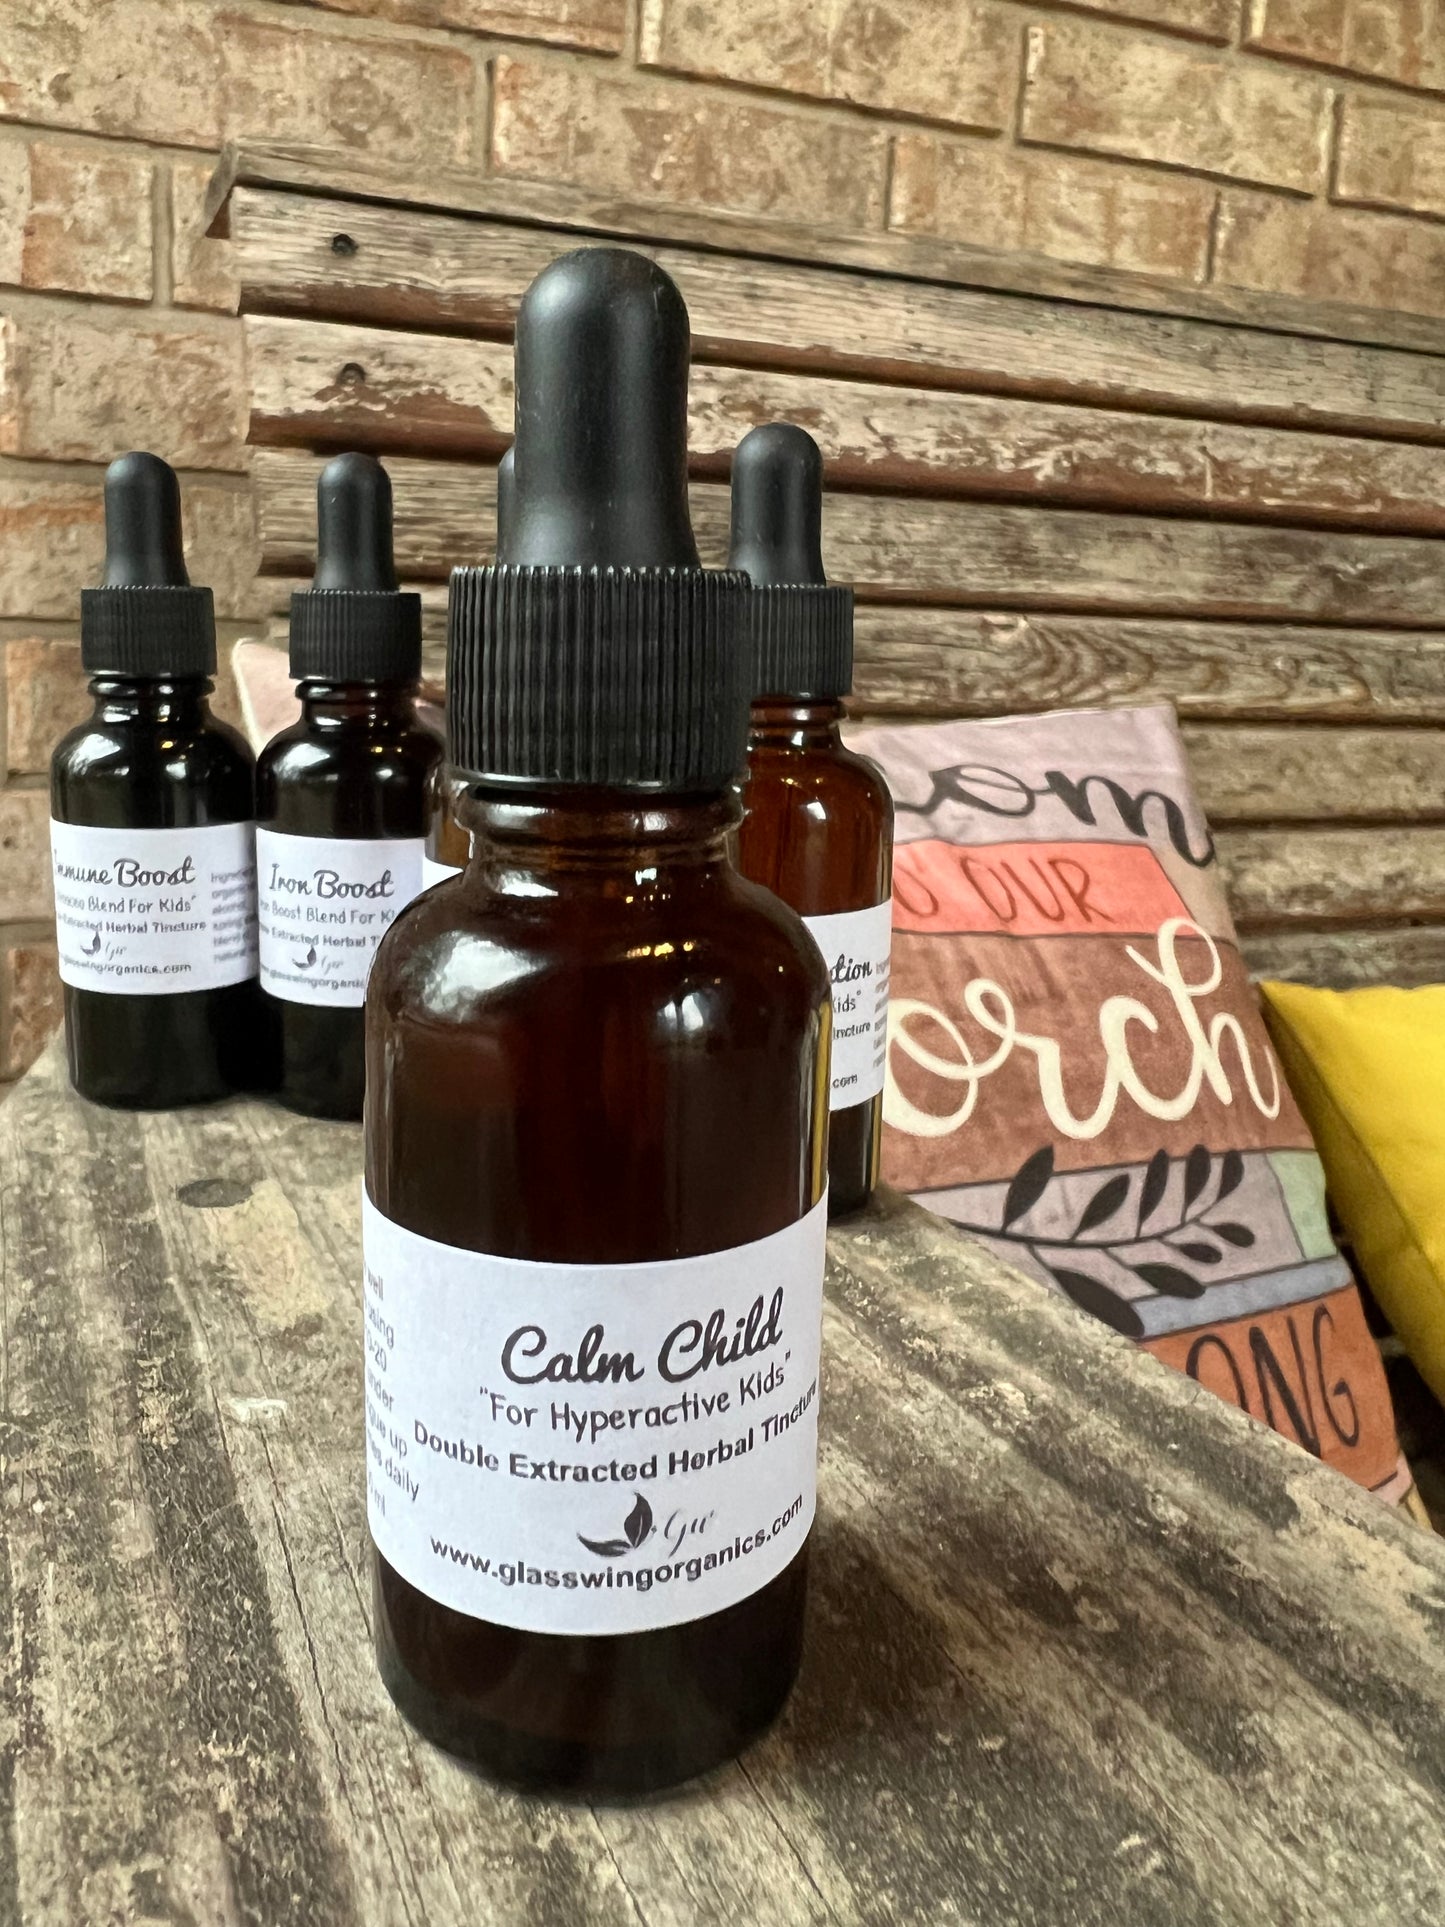 Calm Child Double Extracted Herbal Tincture